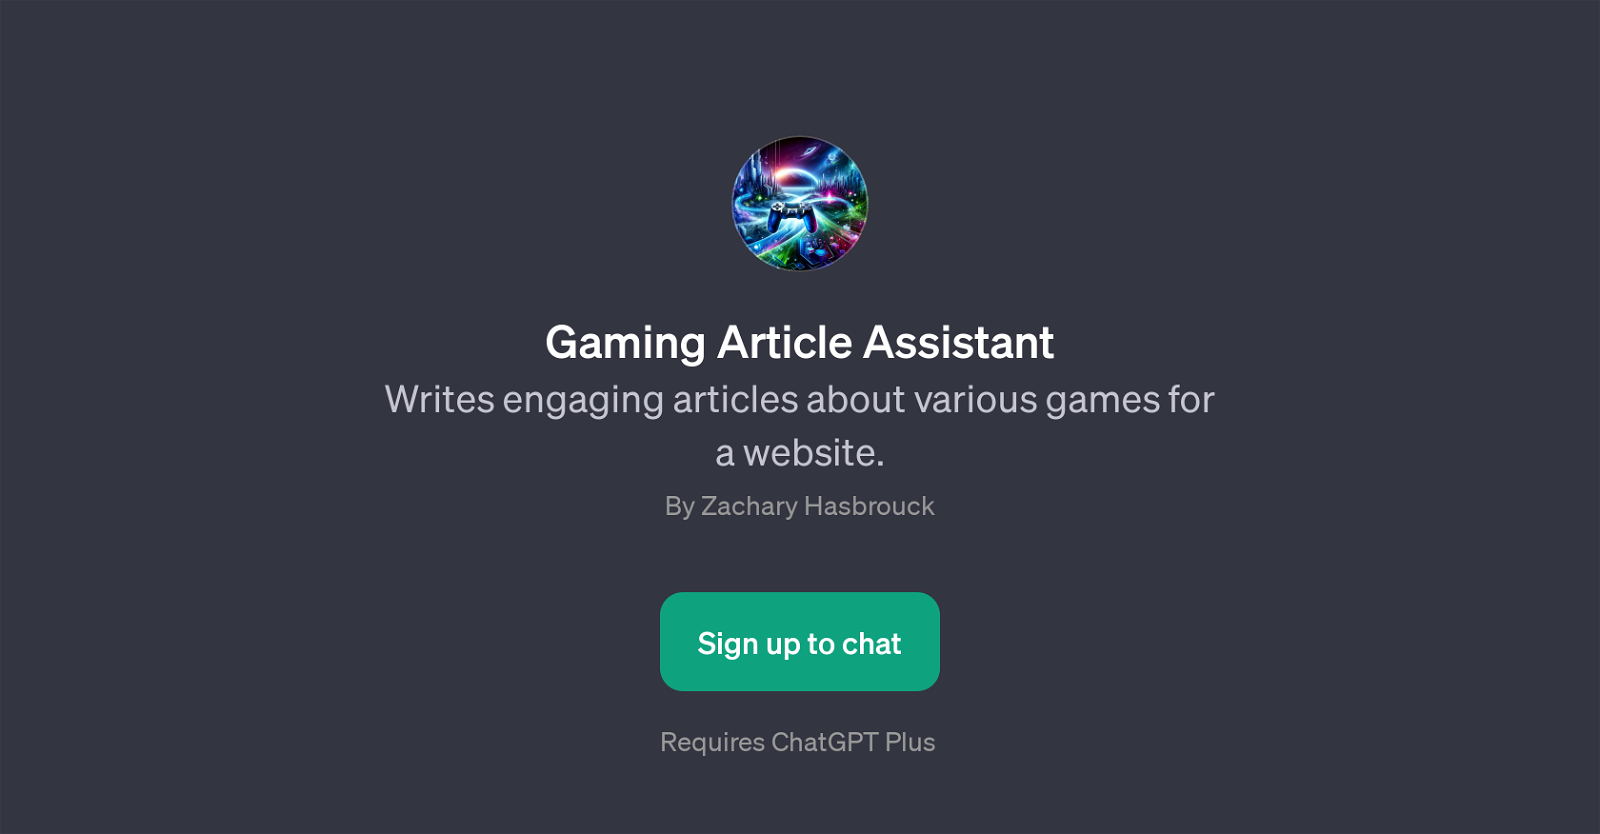 Gaming Article Assistant website